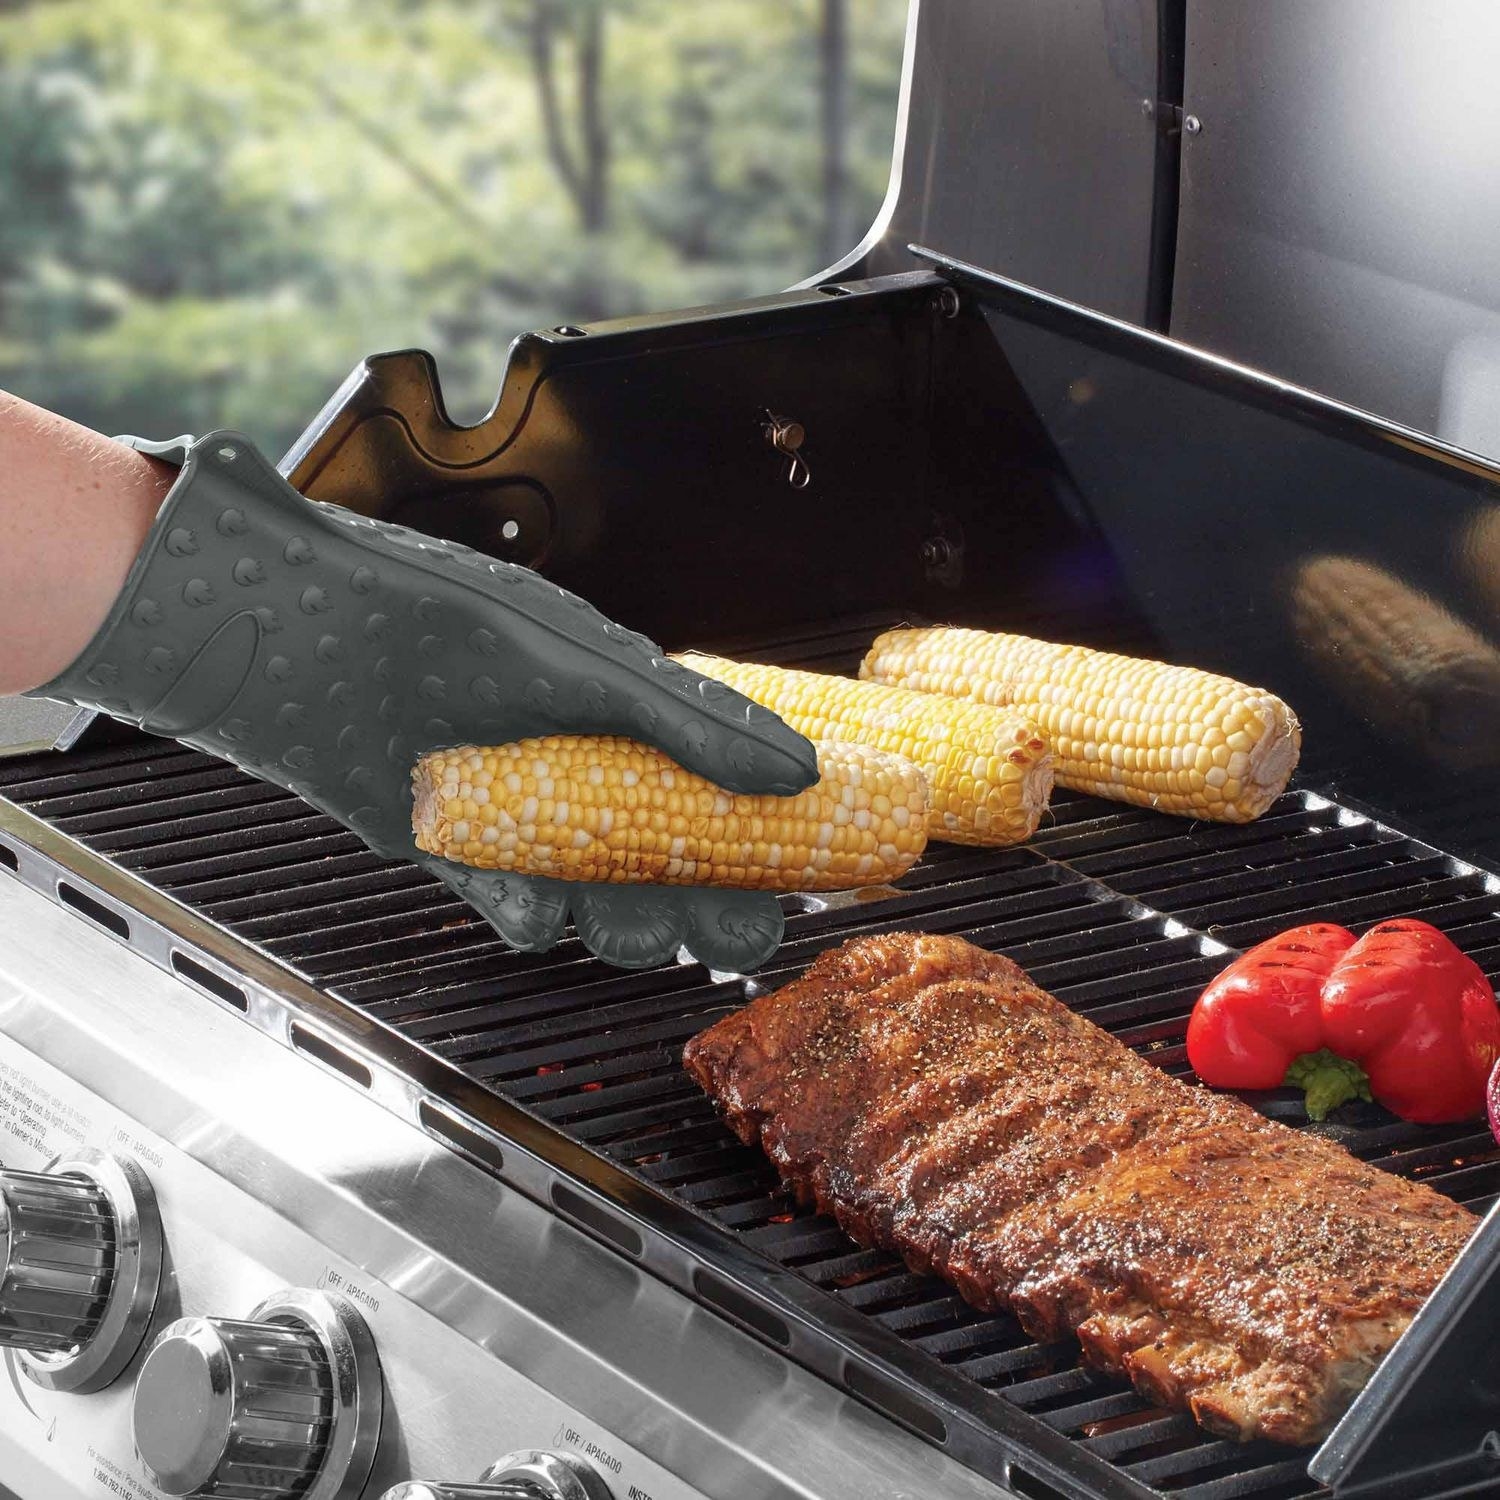 A person wearing the gloves while putting corn on a grill